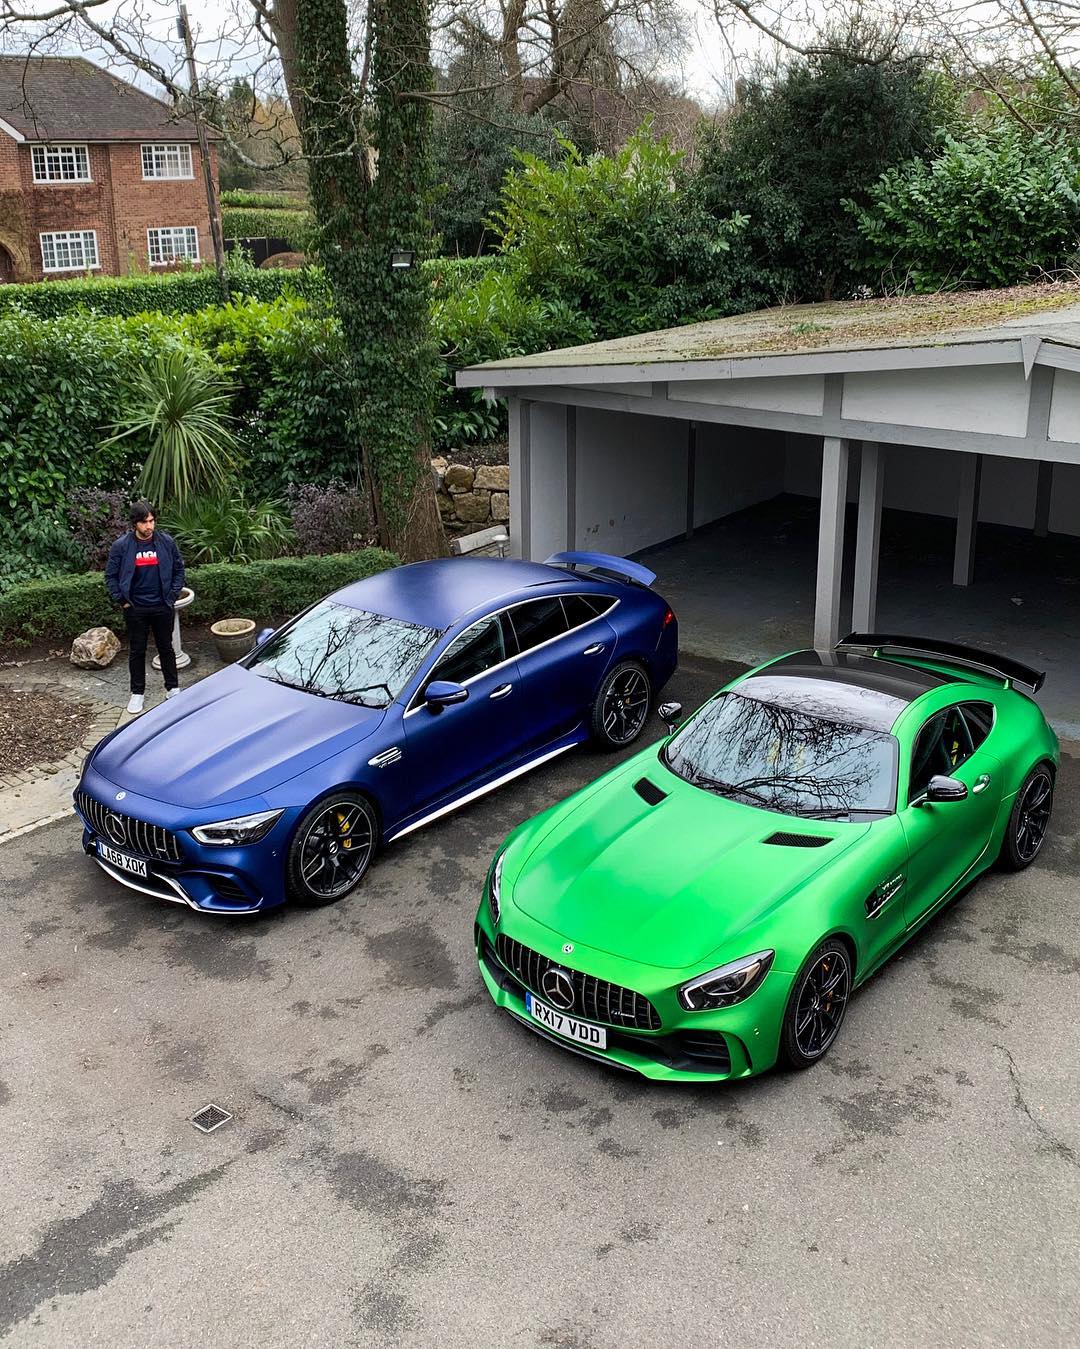 Blue Amg Gt 63 S Four Door Looks Good Next To Green Amg Gt R Coupe Autoevolution